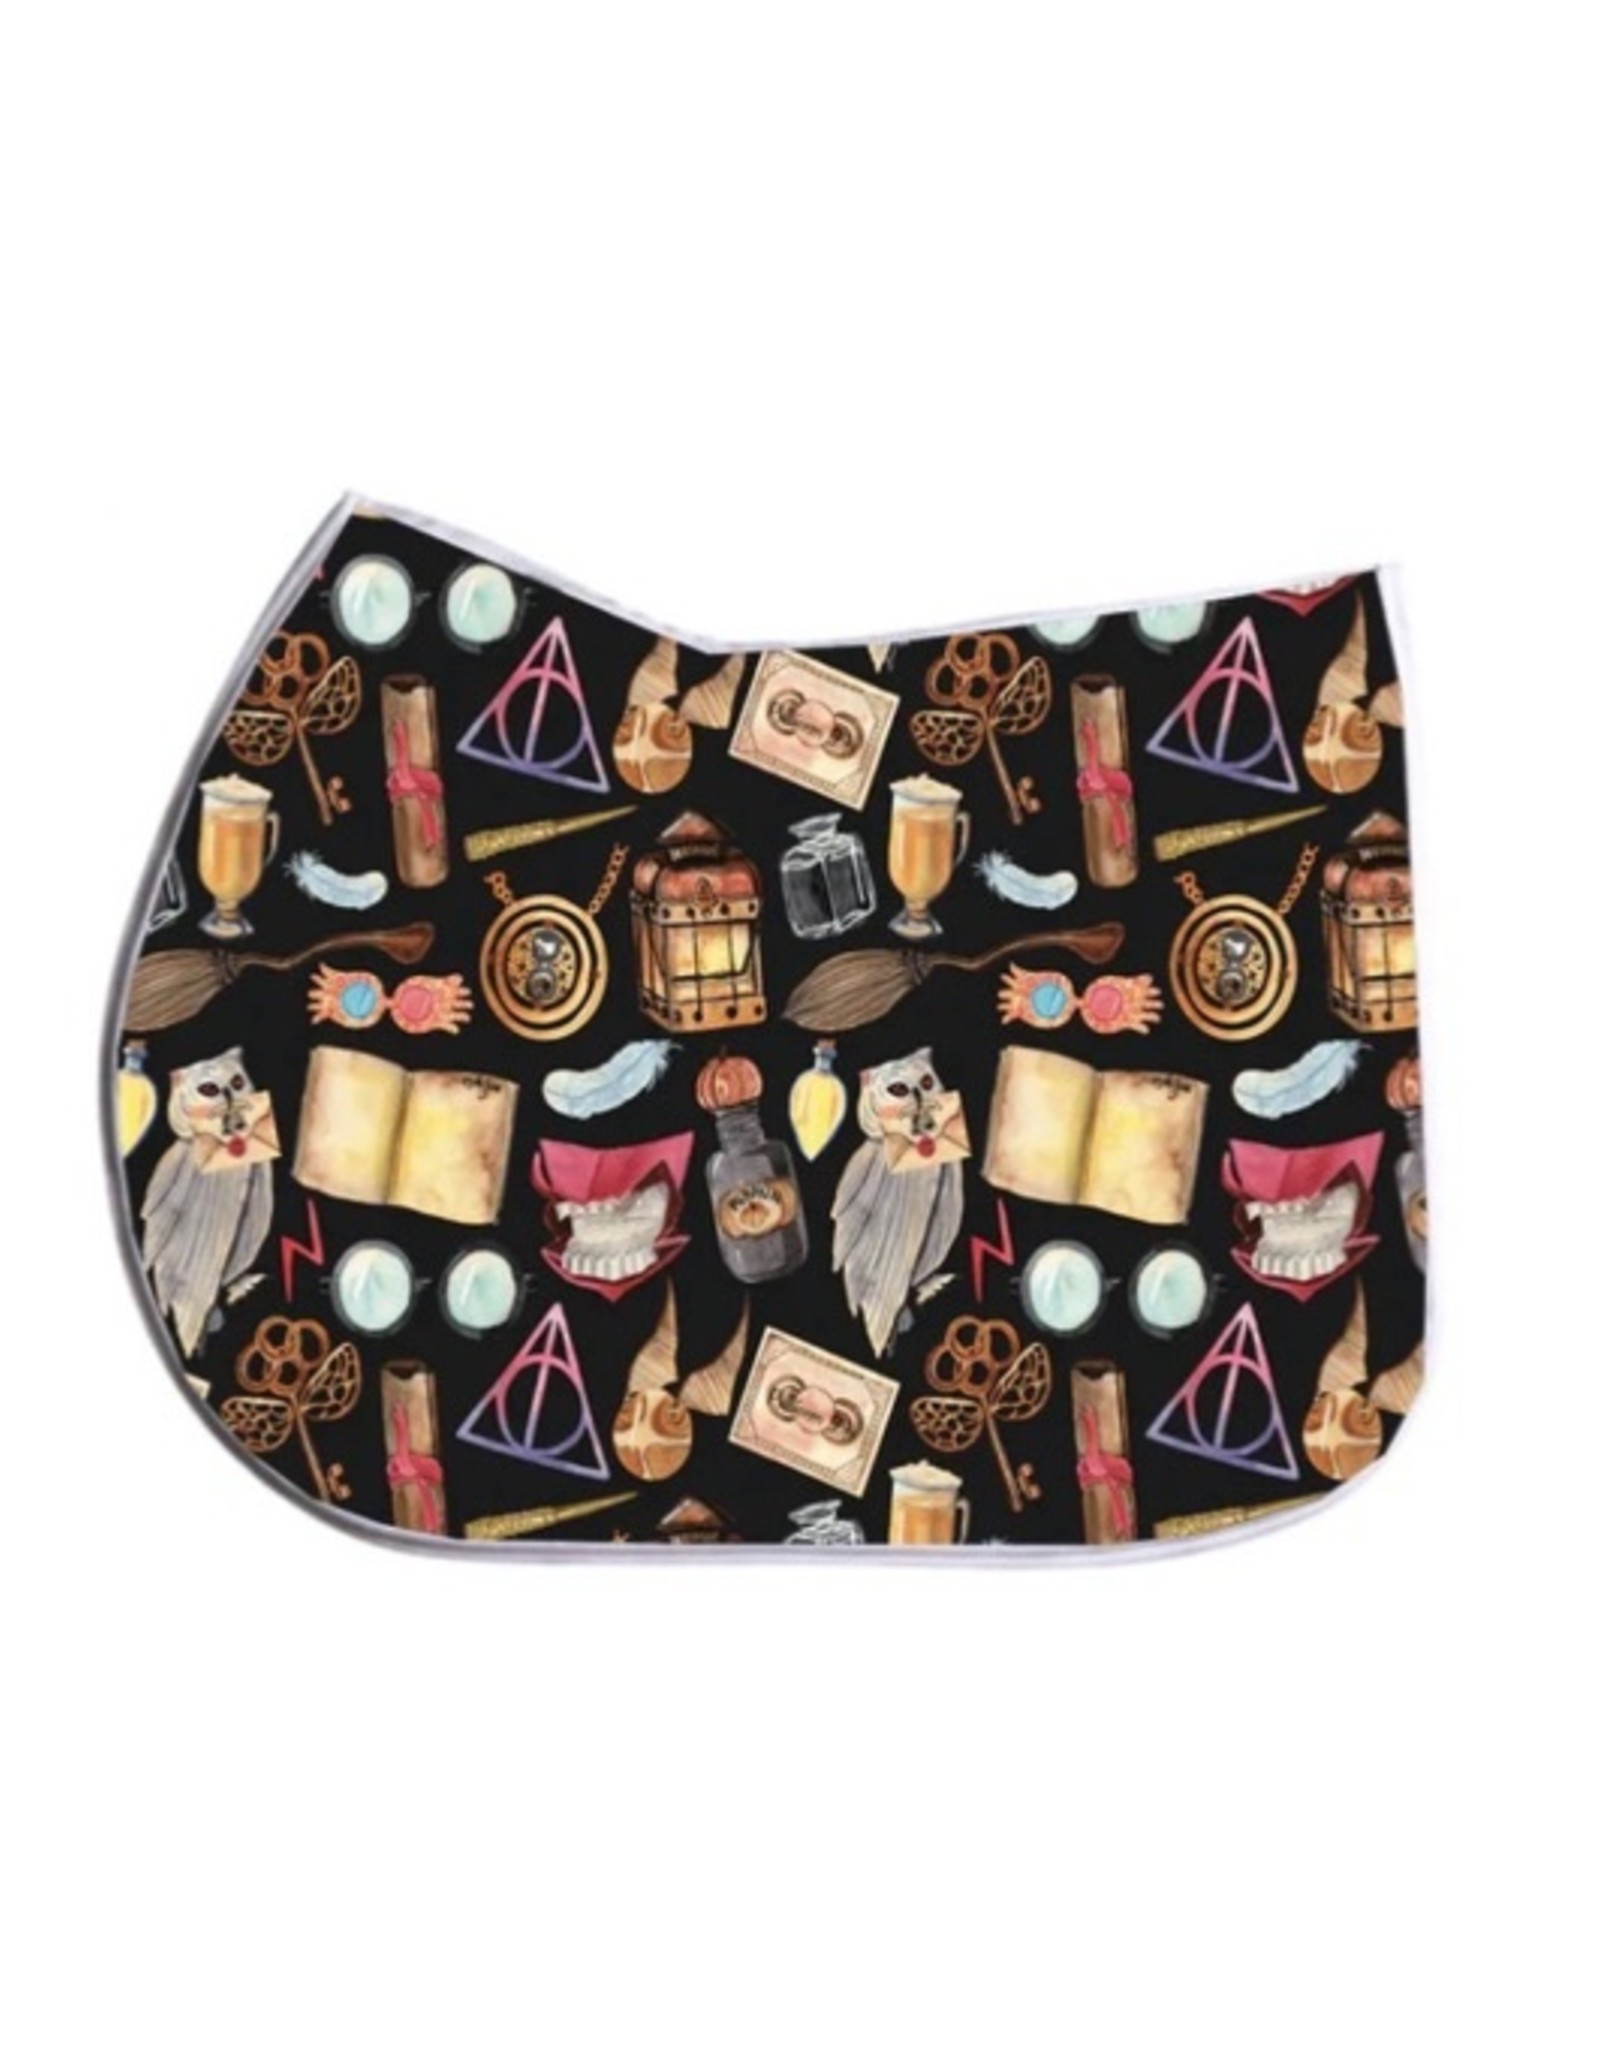 Dreamers & Schemers All Purpose Saddle Pad